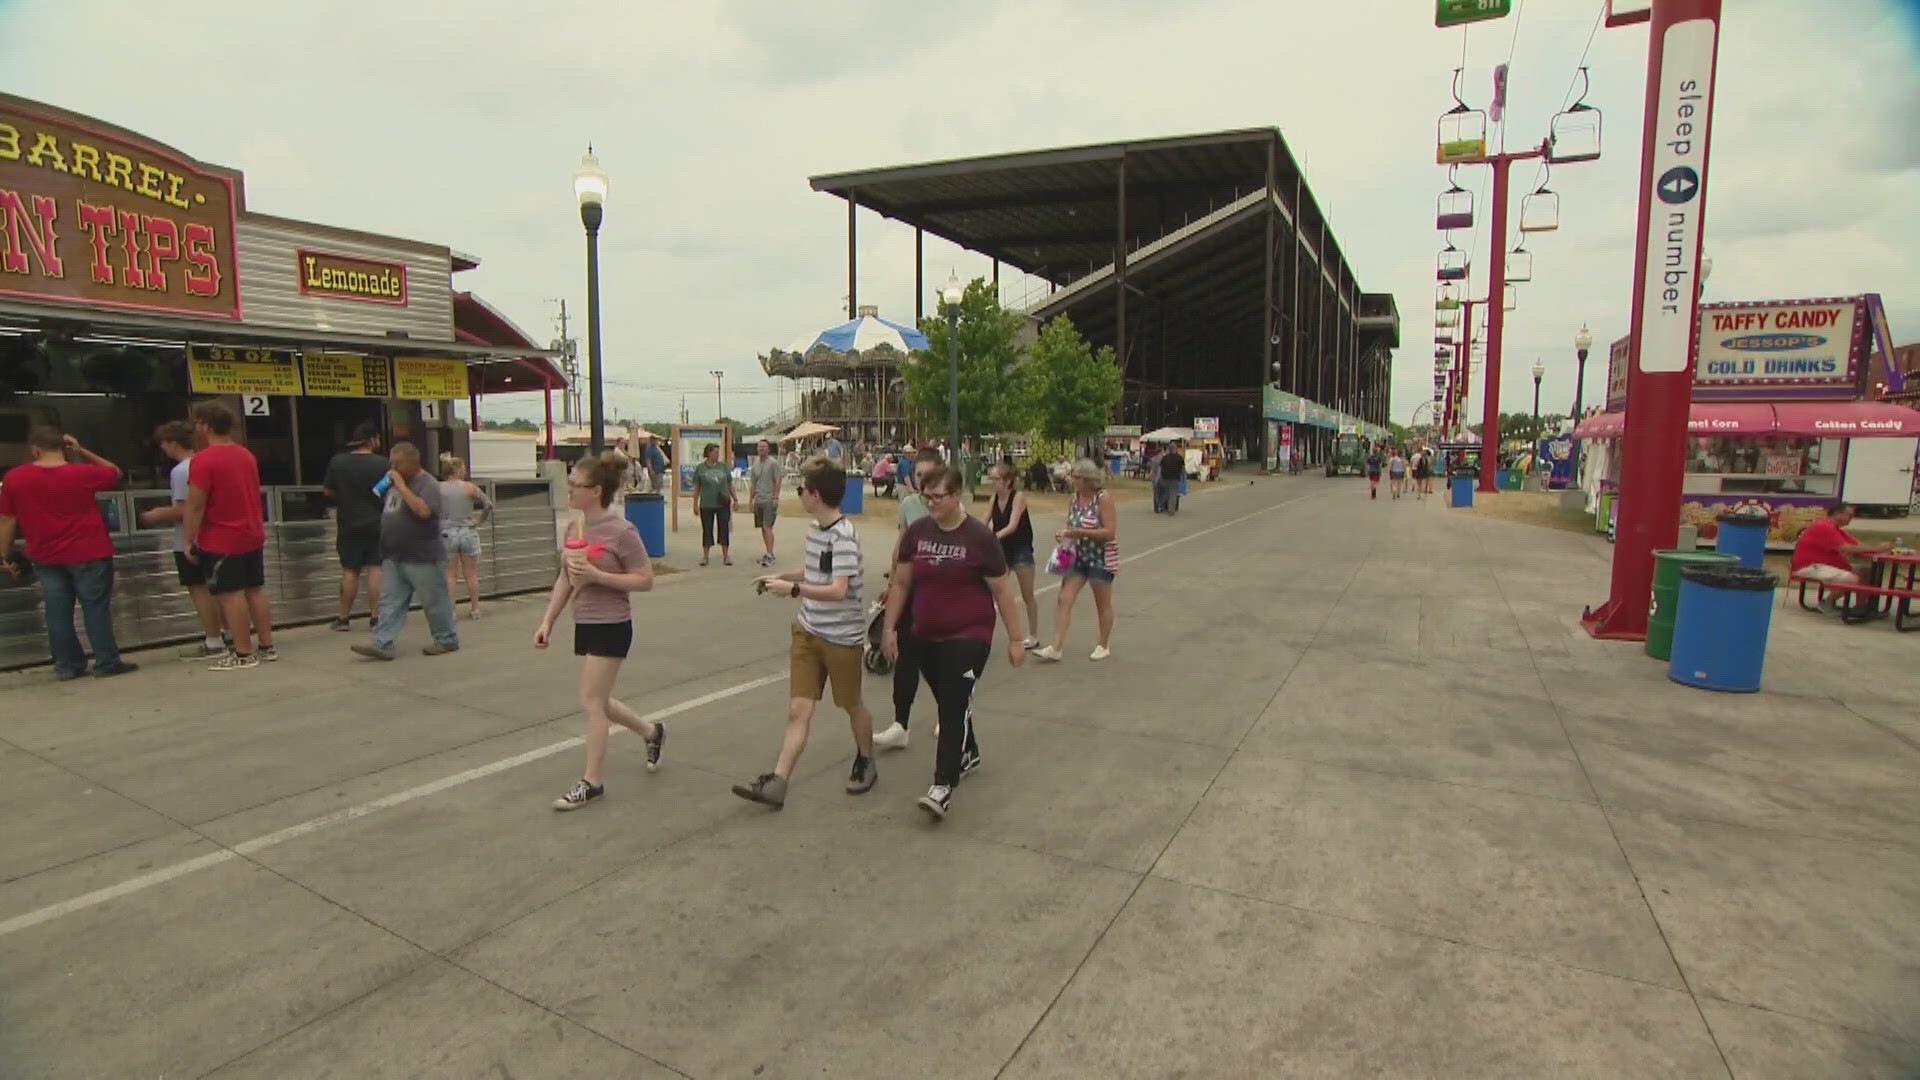 Each adult can chaperone up to 6 people and must remain at the fairgrounds with the minors they're accompanying.